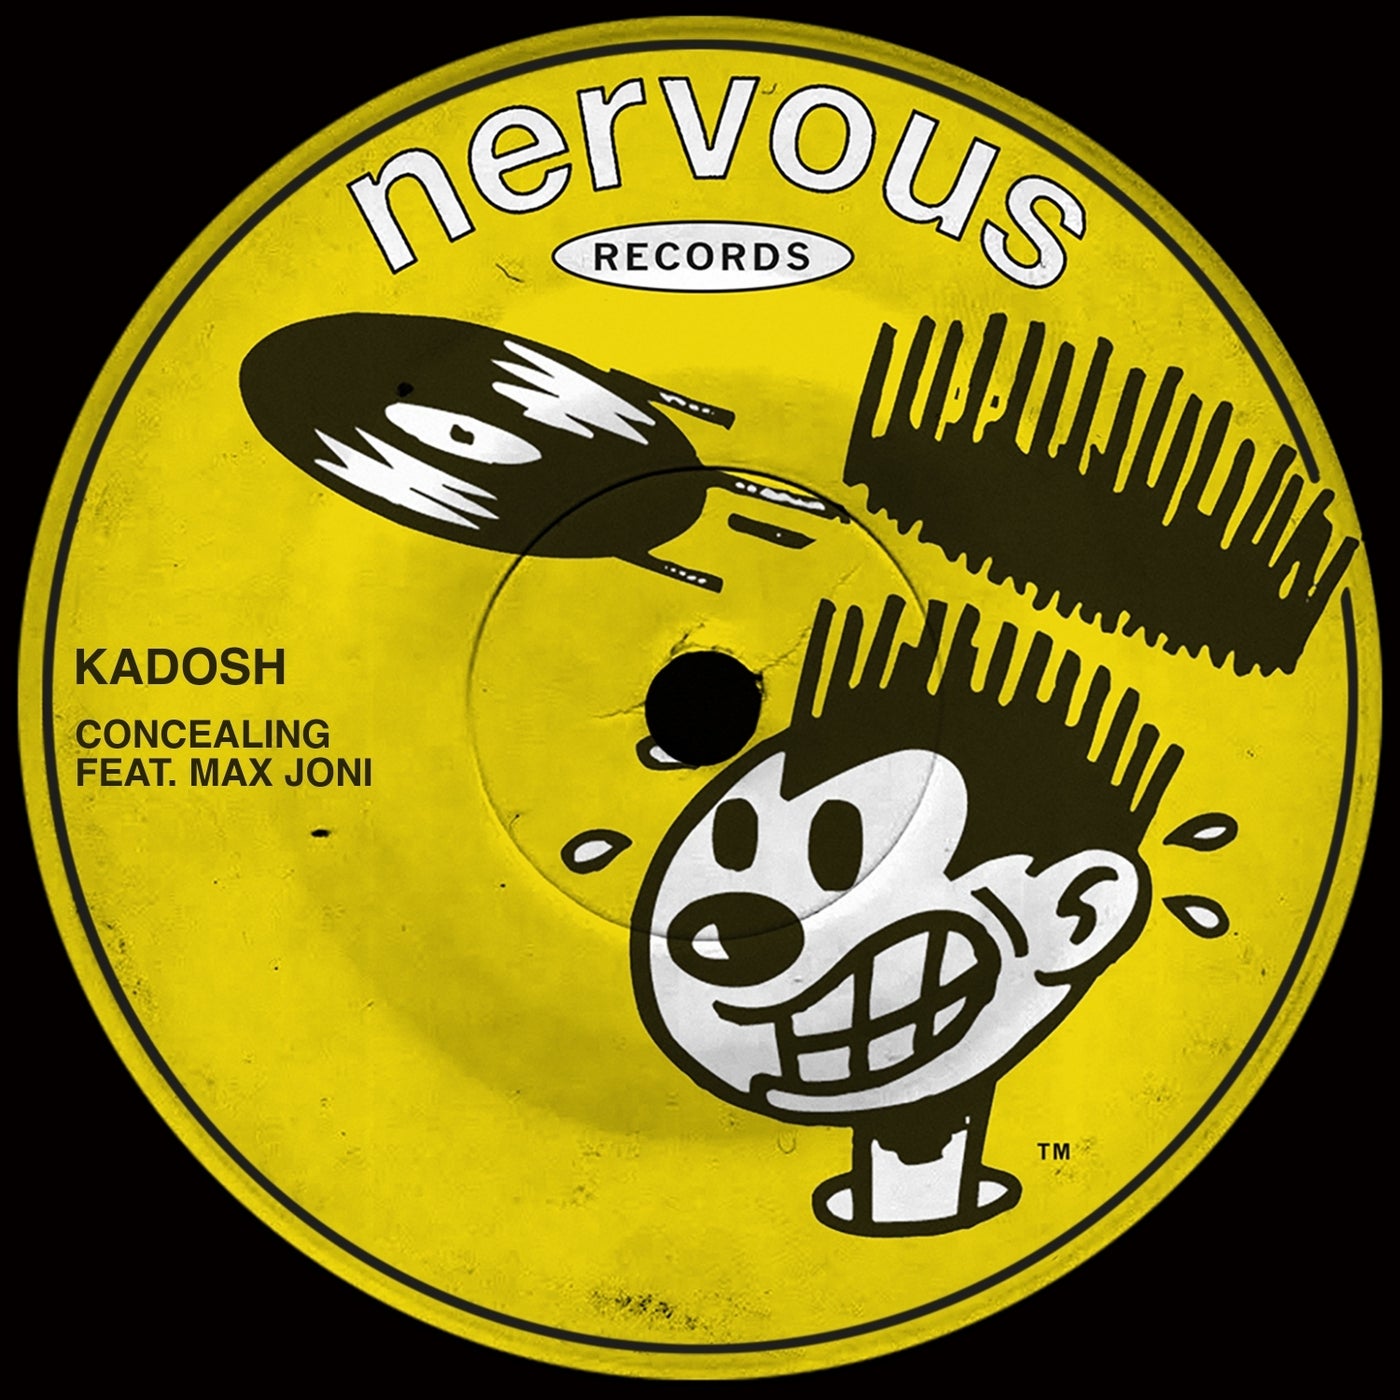 Kadosh (IL) - Concealing feat. Max Joni on Nervous Records